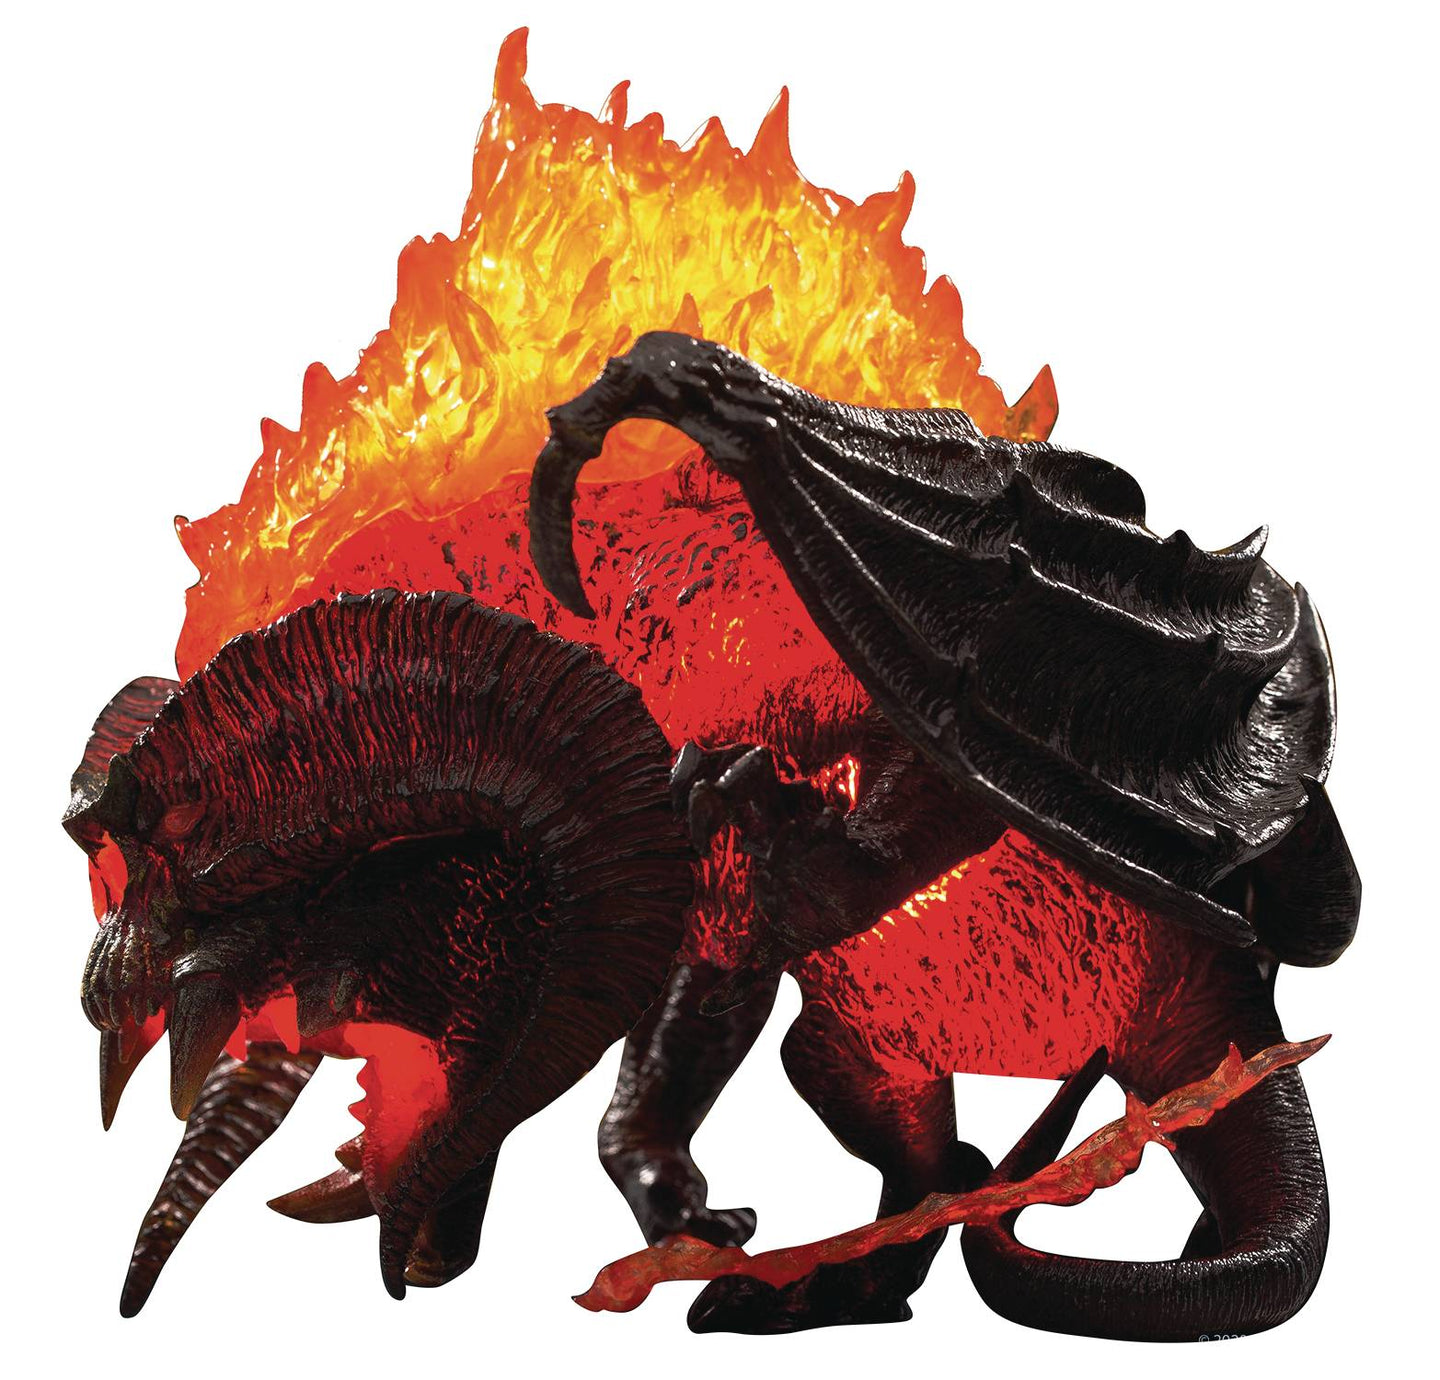 Lord Of The Rings Balrog 2.0 Defo Real Soft Vinyl 6 Inch Statue Light Up Version